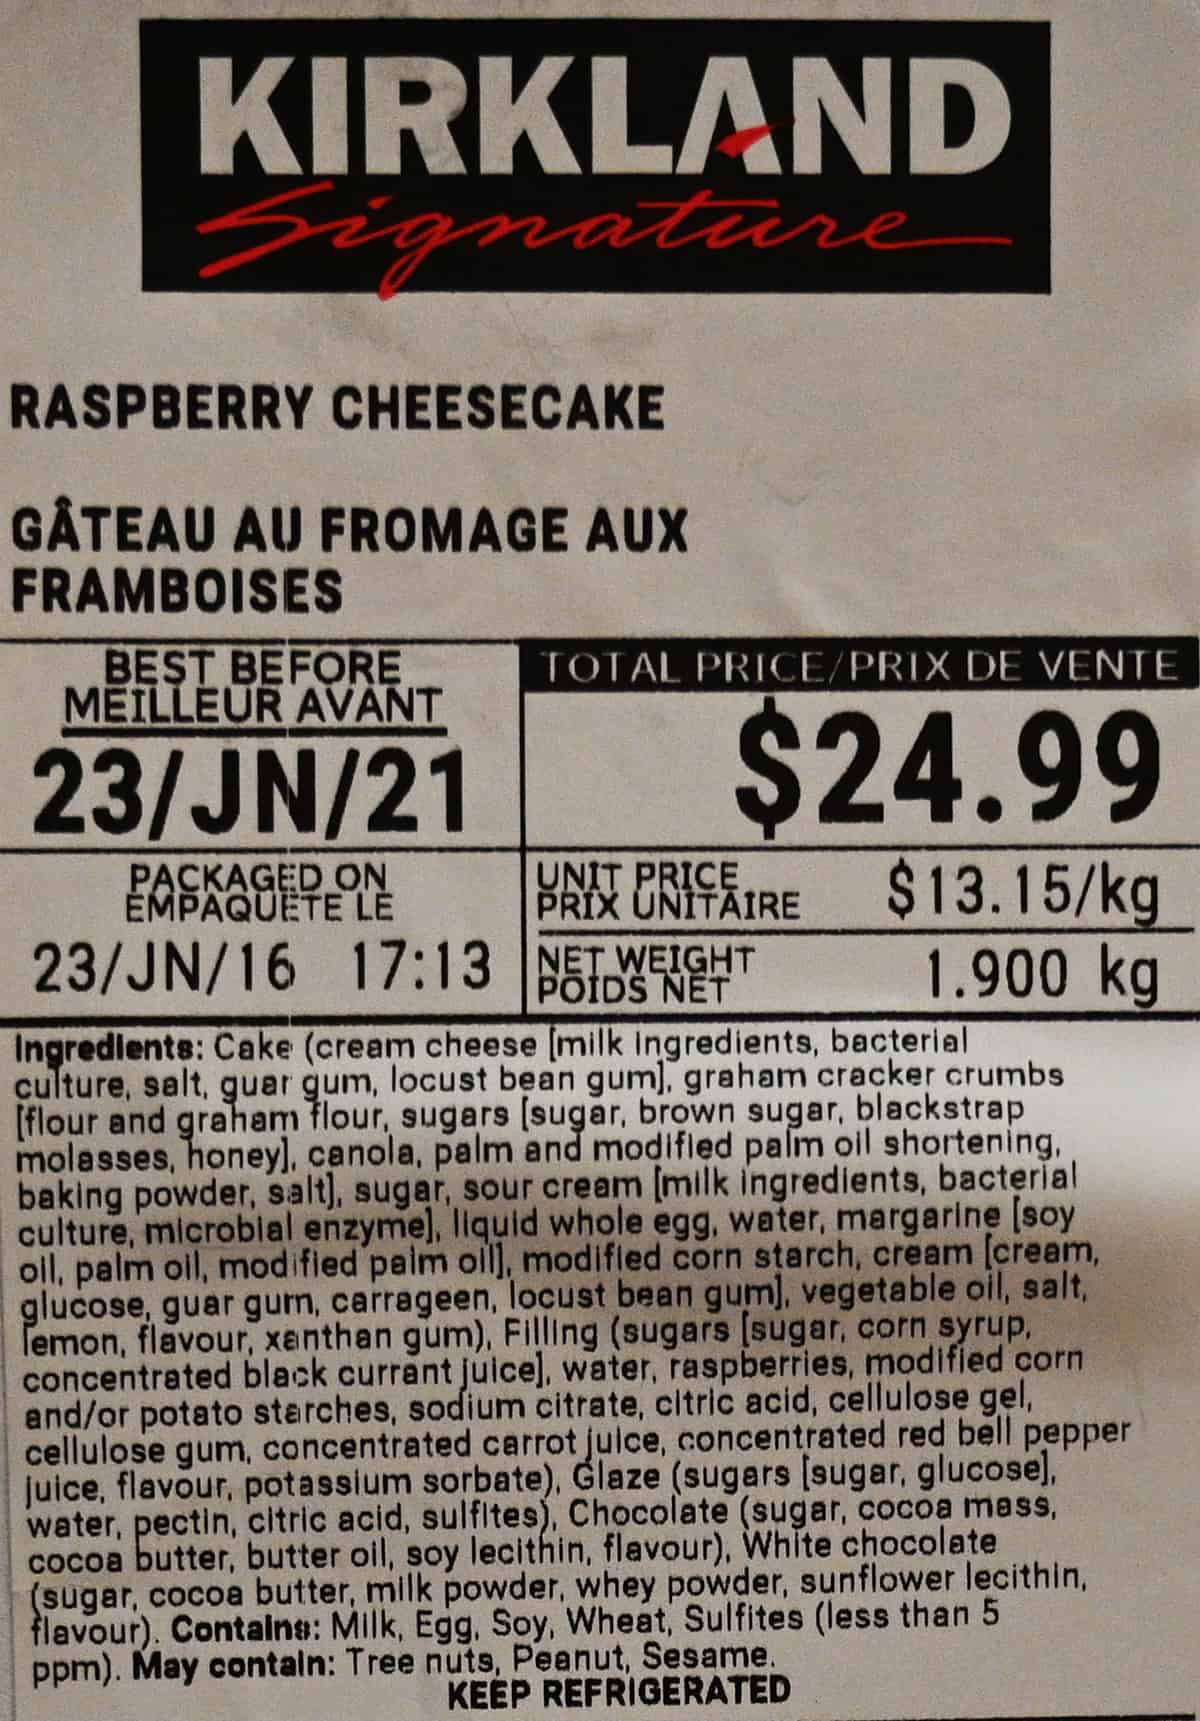 Image of the label from the front of the cheesecake showing the price, best before date and ingredients.